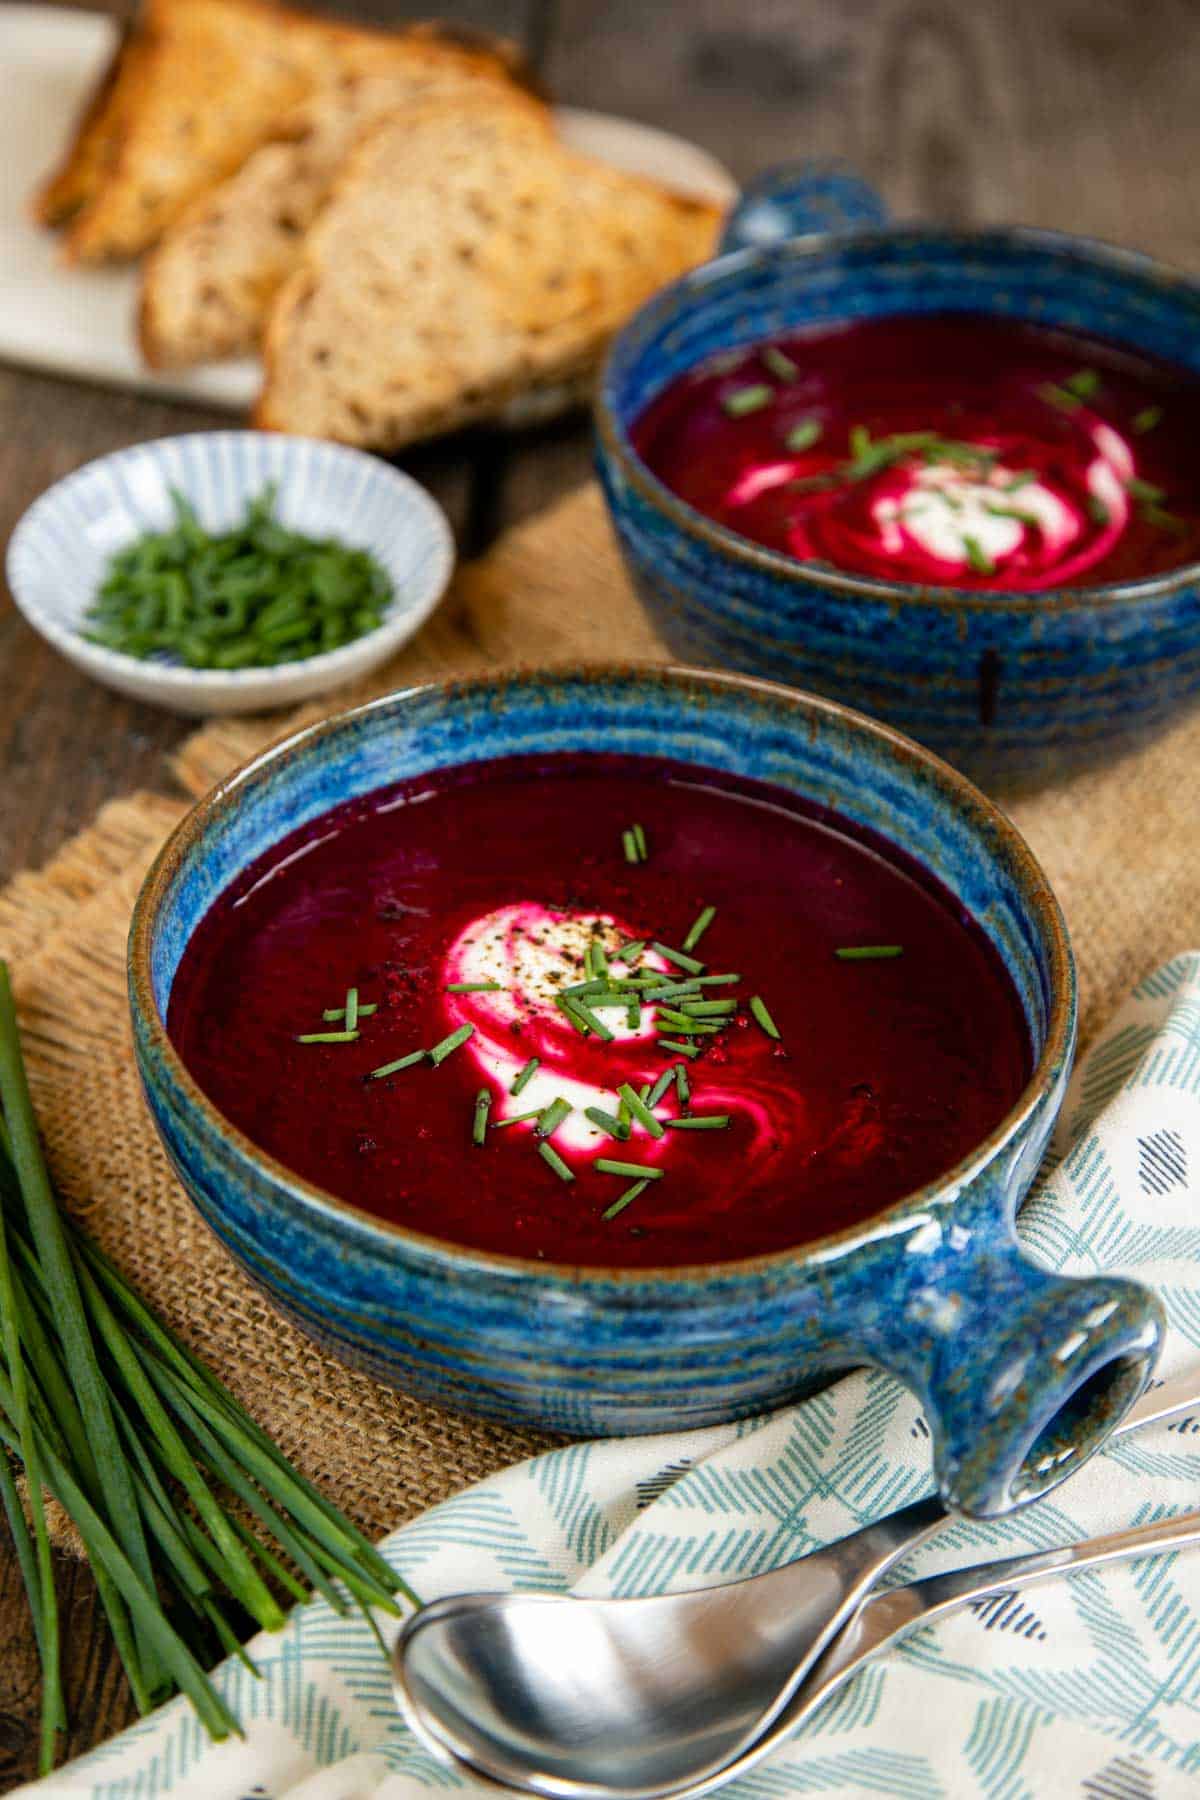 Striking ruby red beetroot soup served in blue bowls with a garnish of sour cream and chives for fabulous contrast.